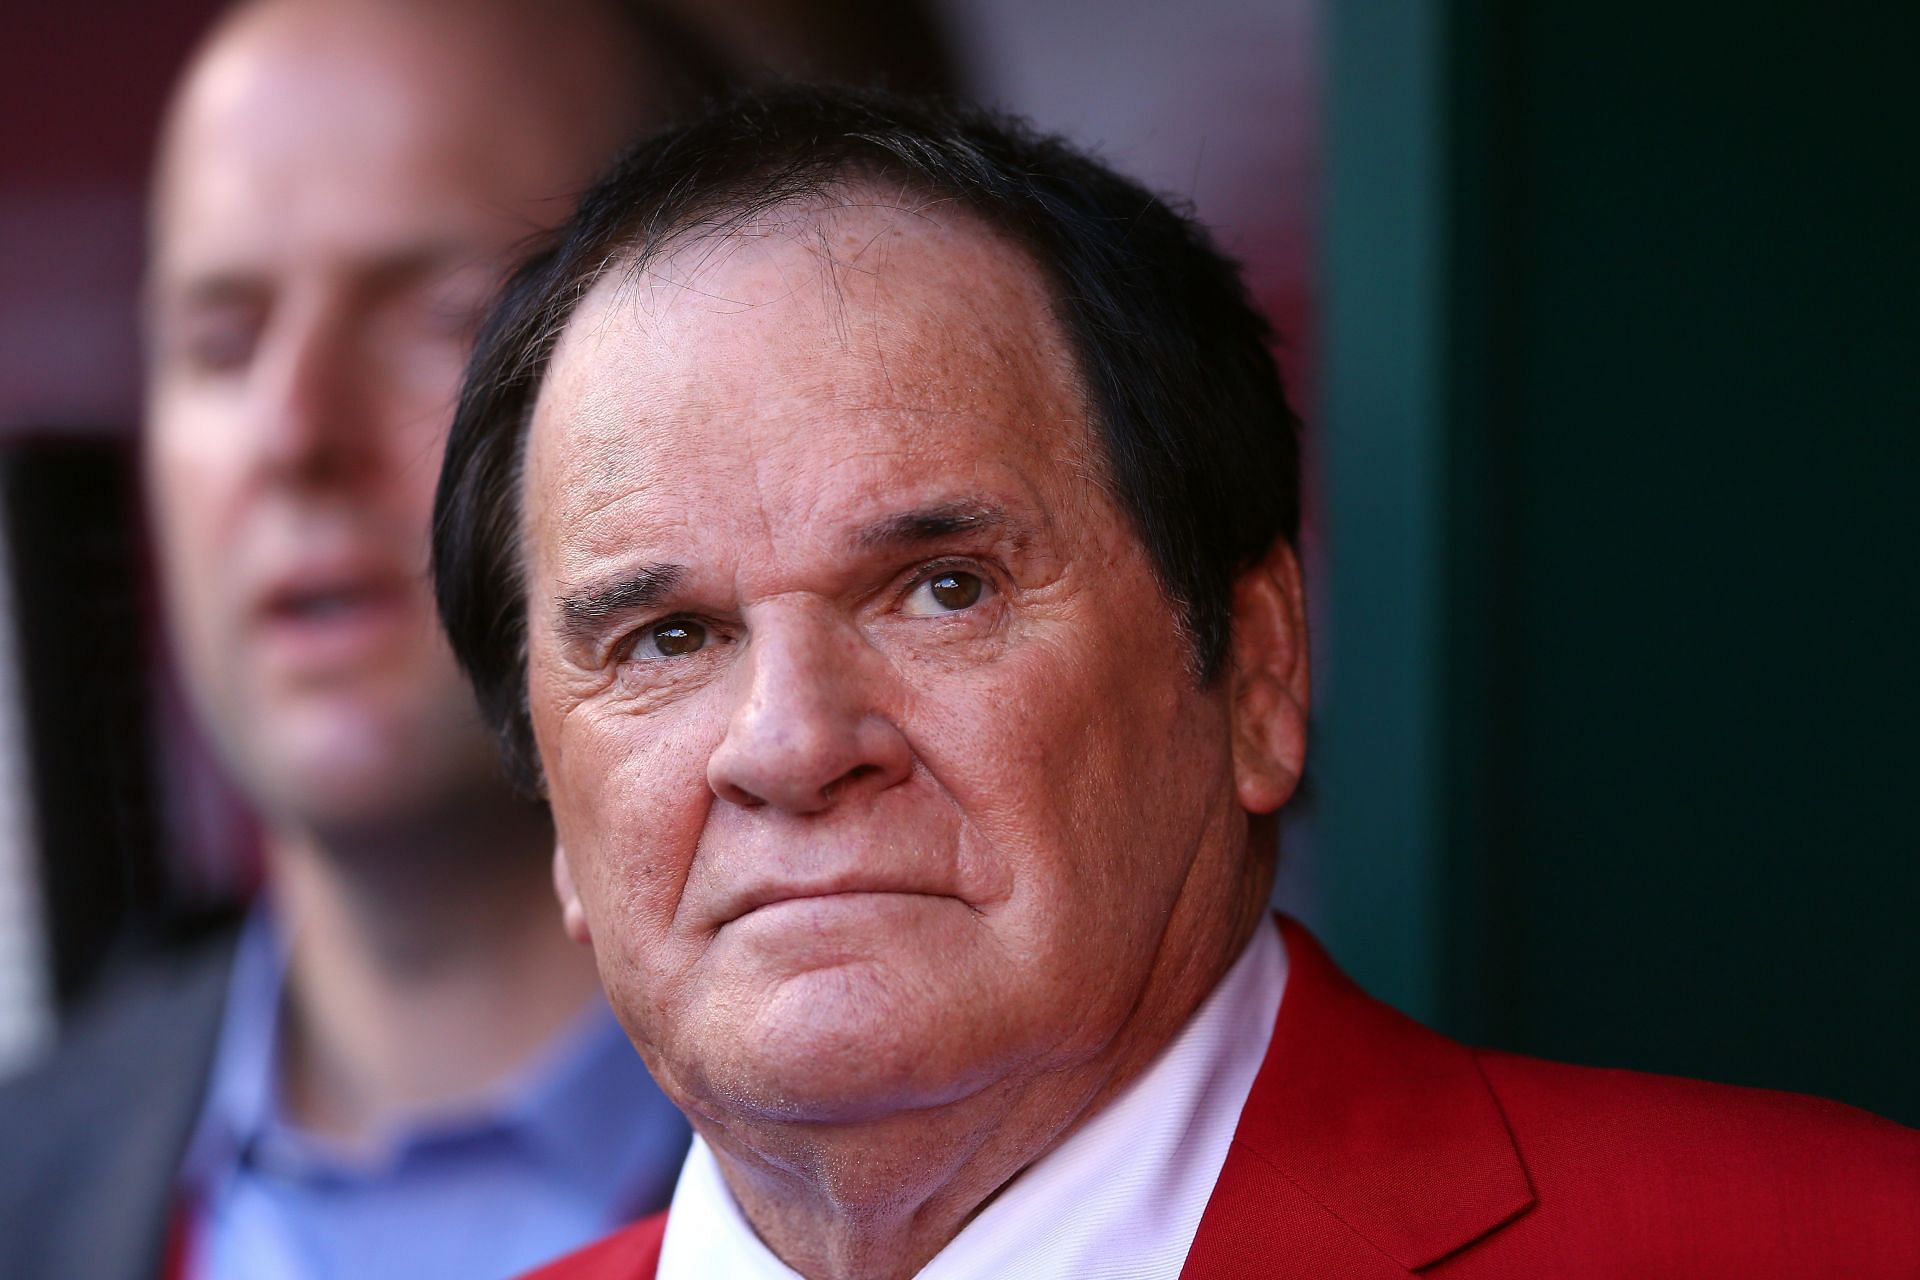 Former player and manager Pete Rose looks on prior to the 86th MLB All-Star Game at the Great American Ball Park on July 14, 2015 in Cincinnati, Ohio.